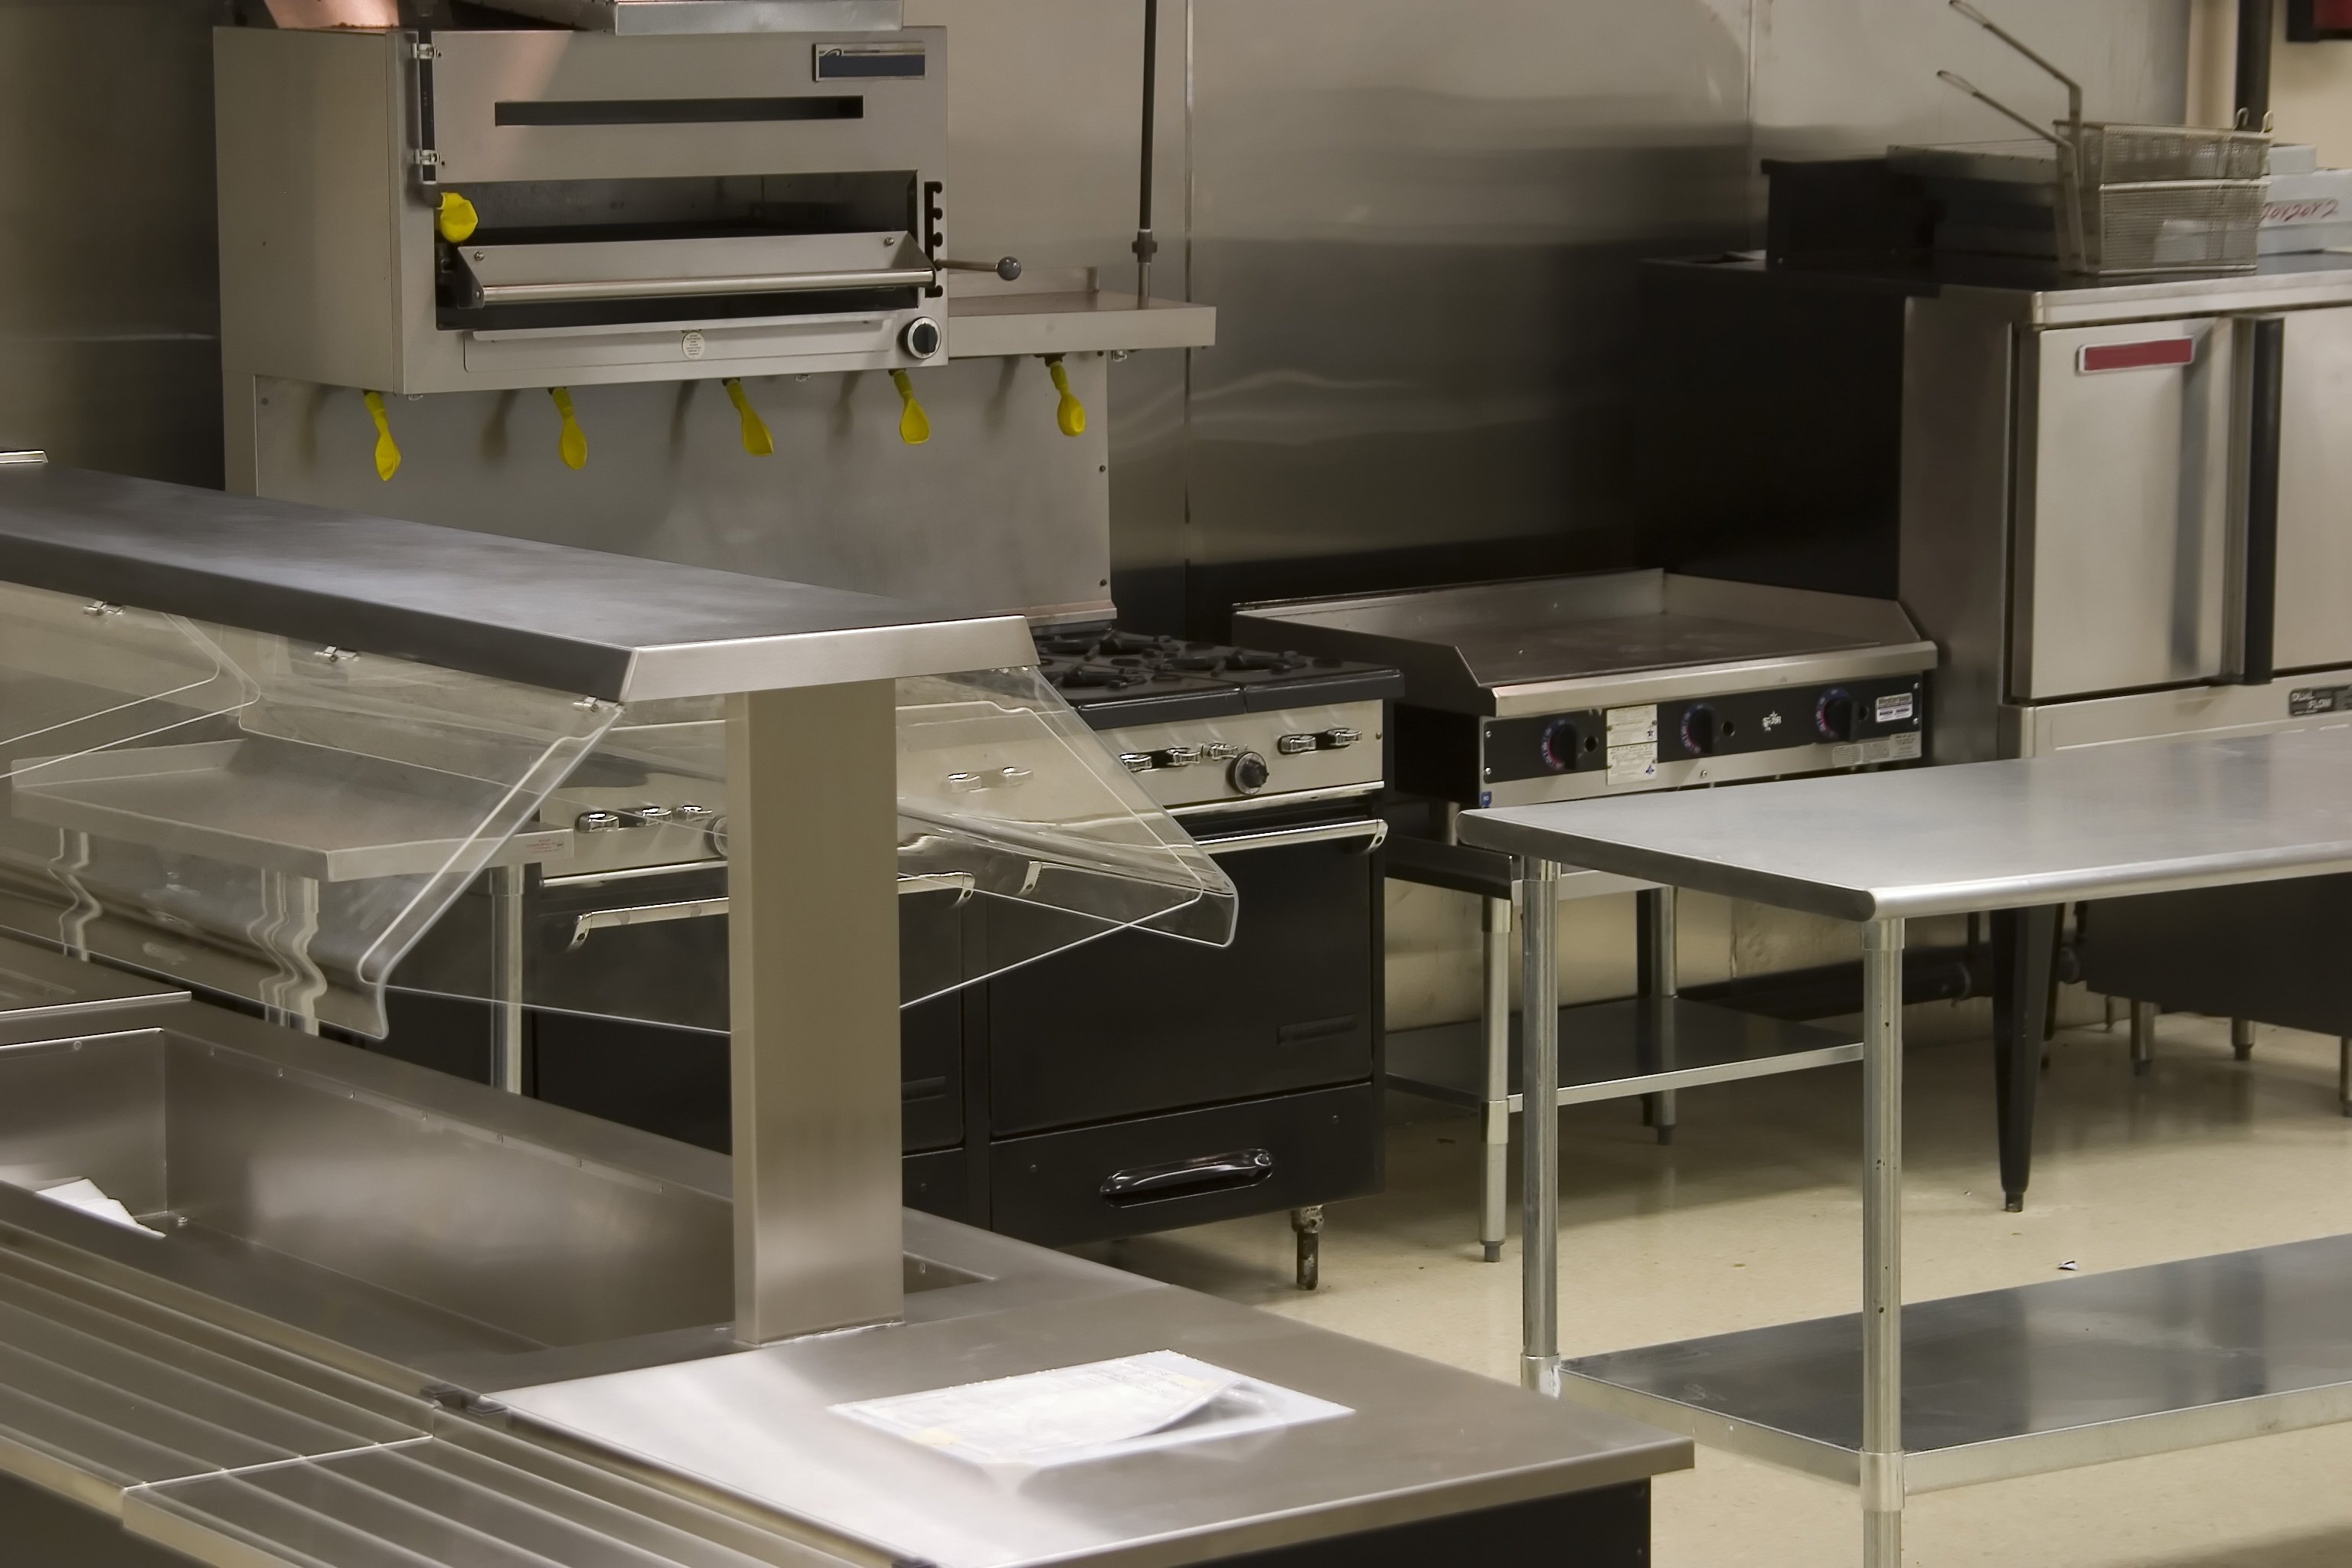 New DEP Rule Targets Exhaust Emissions from Commercial Kitchens